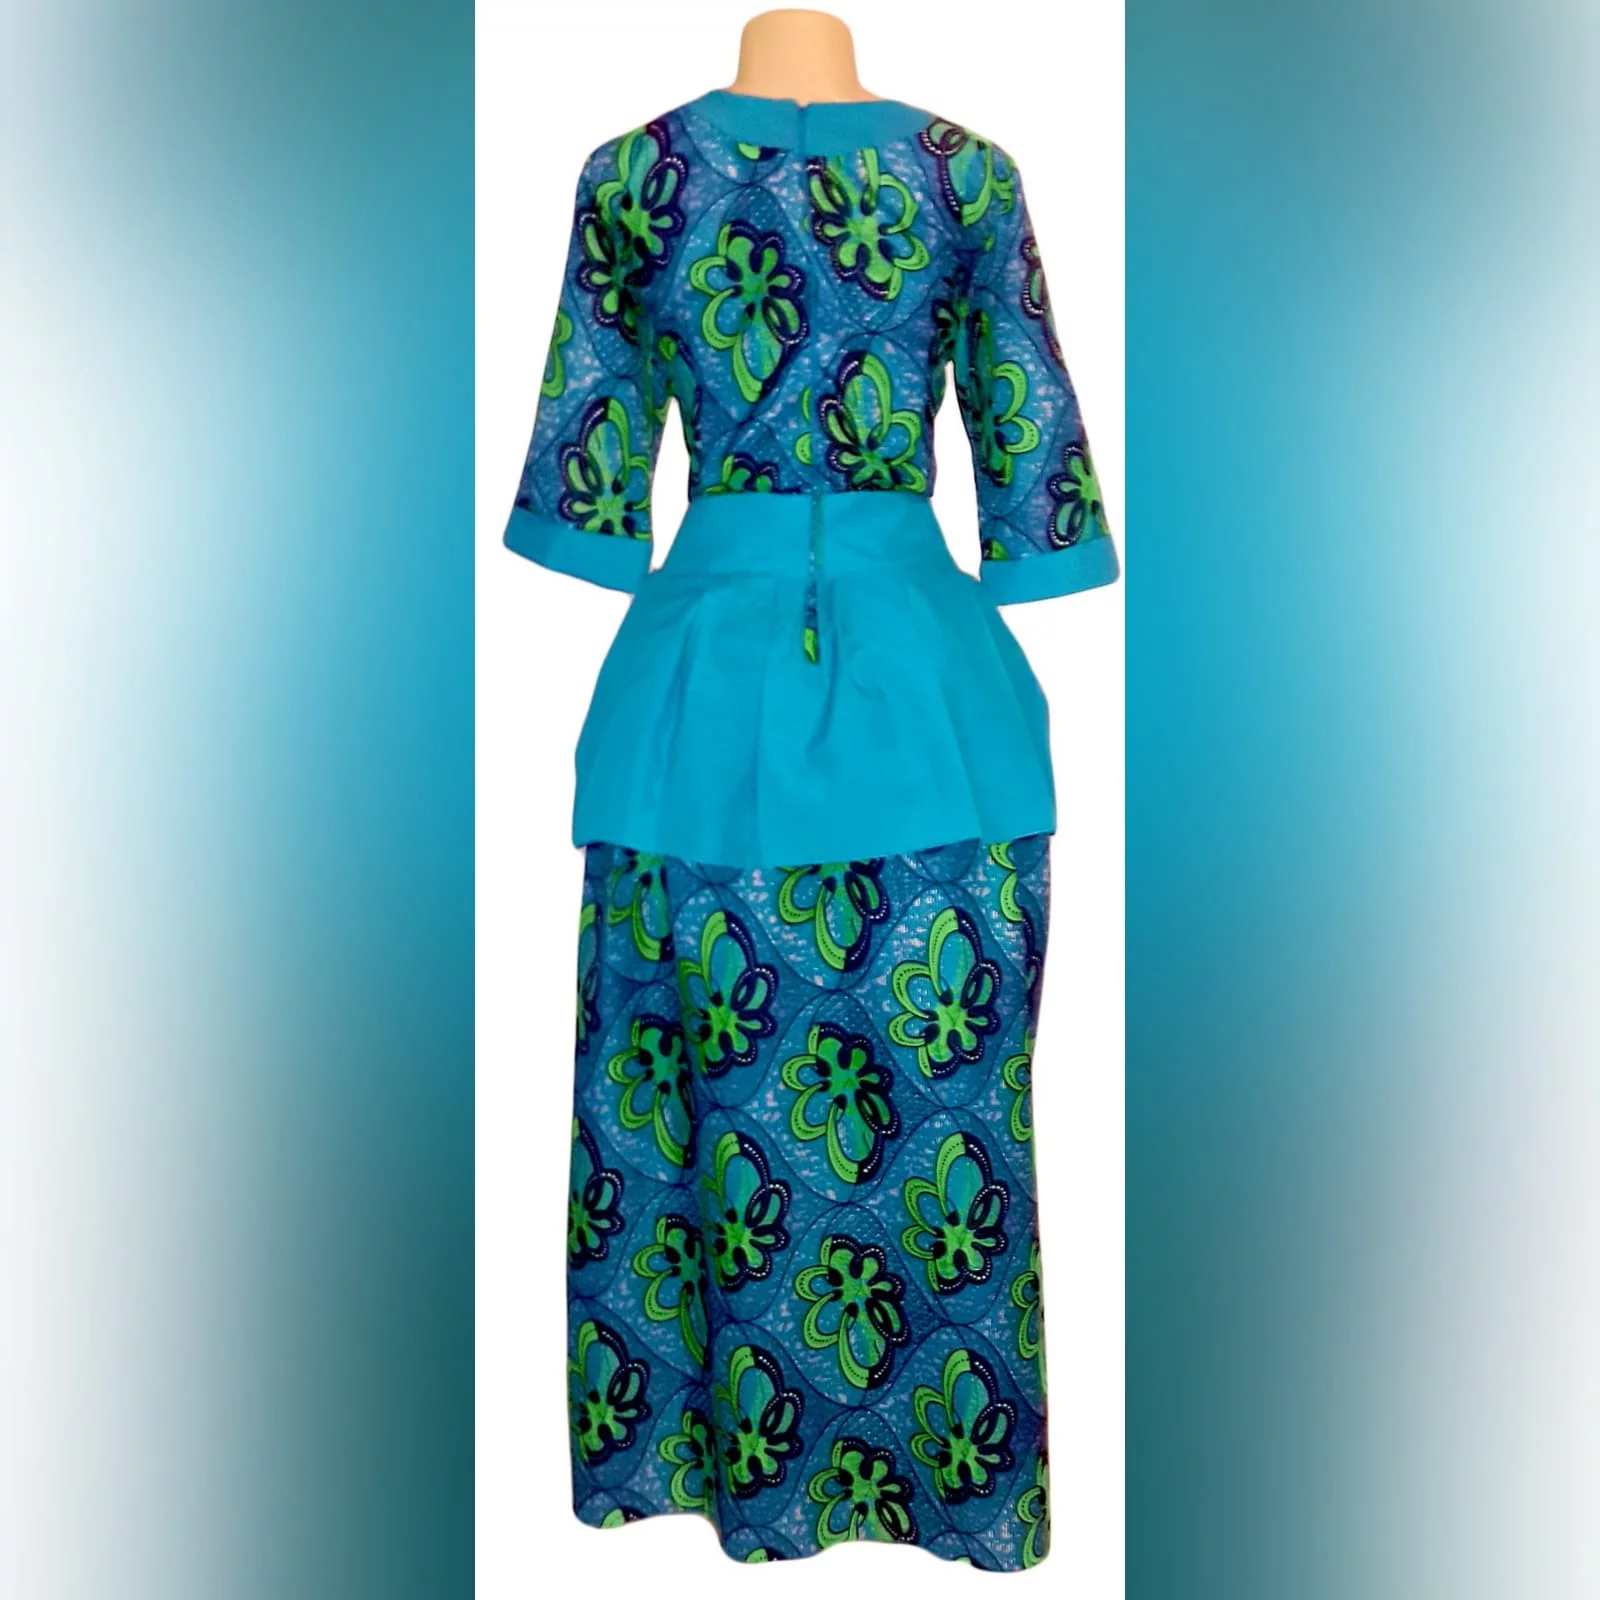 Modern traditional green and blue high low dress 3 modern traditional green and blue hi lo dress with a v neckline, 3/4 sleeves and a back peplum with a waistbelt. Matching doek.